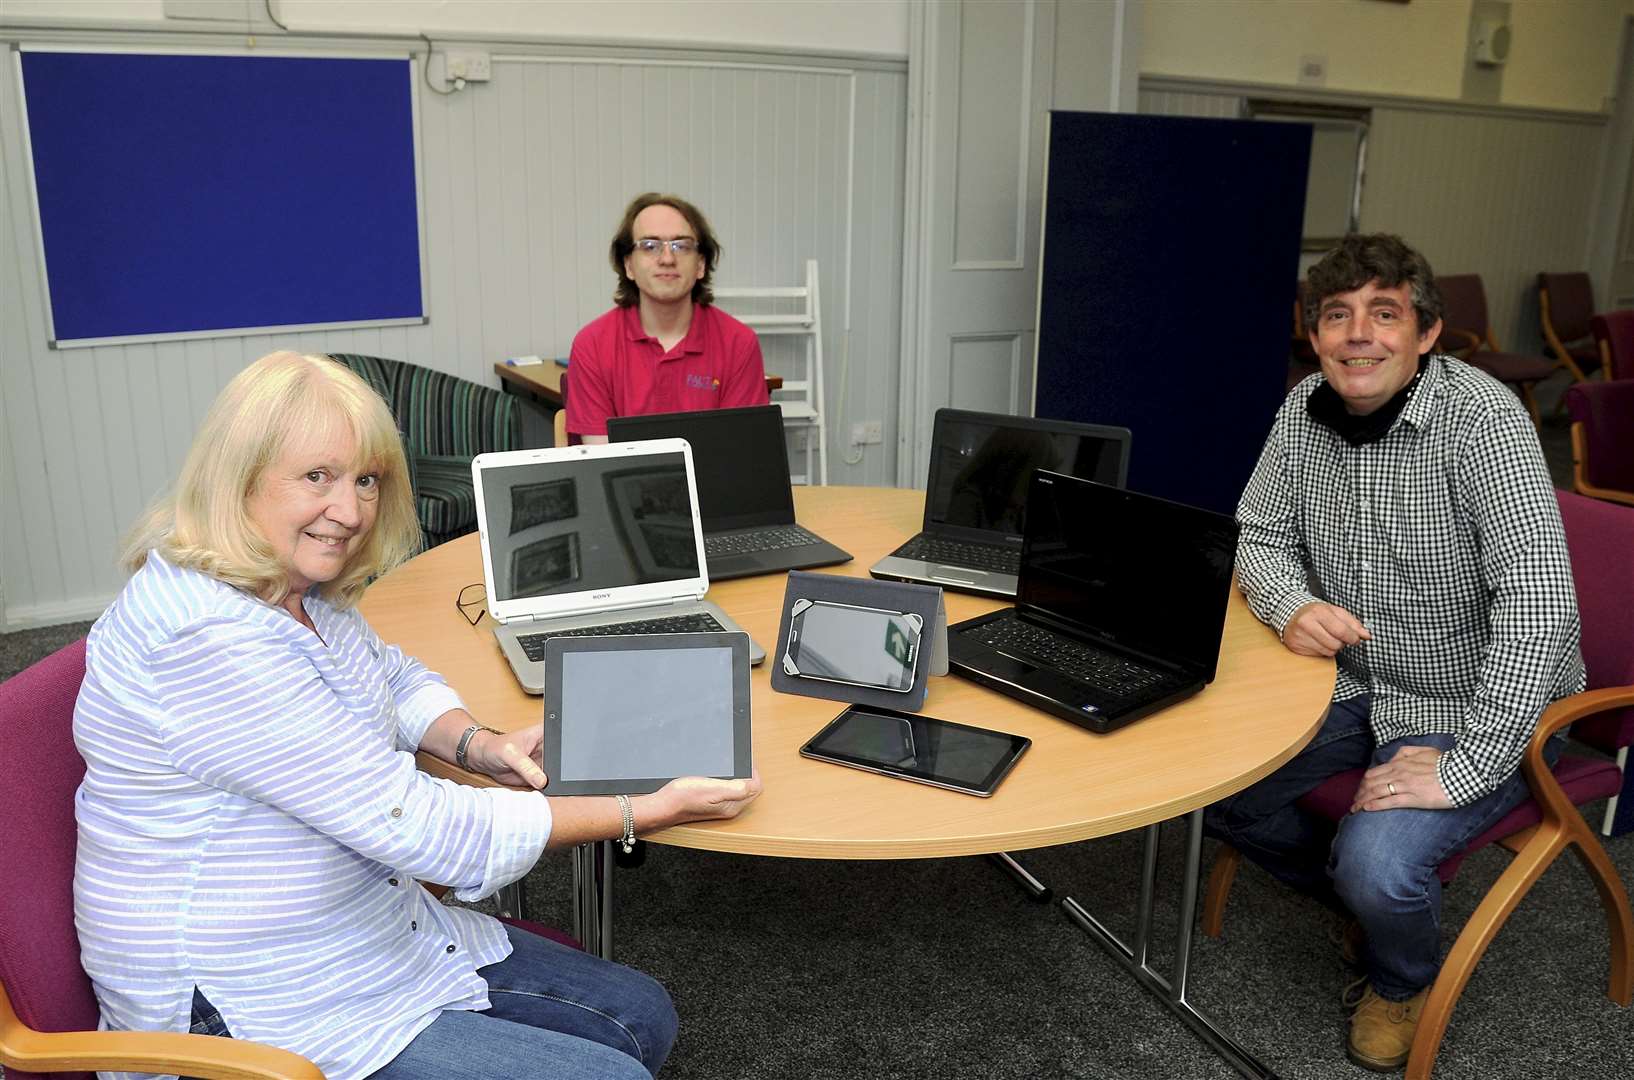 Janice Cooper and Euan Kershaw (middle) of FACT are joined by Lee McGrath from ReBoot (right)at Forres Town Hall’s North Room.